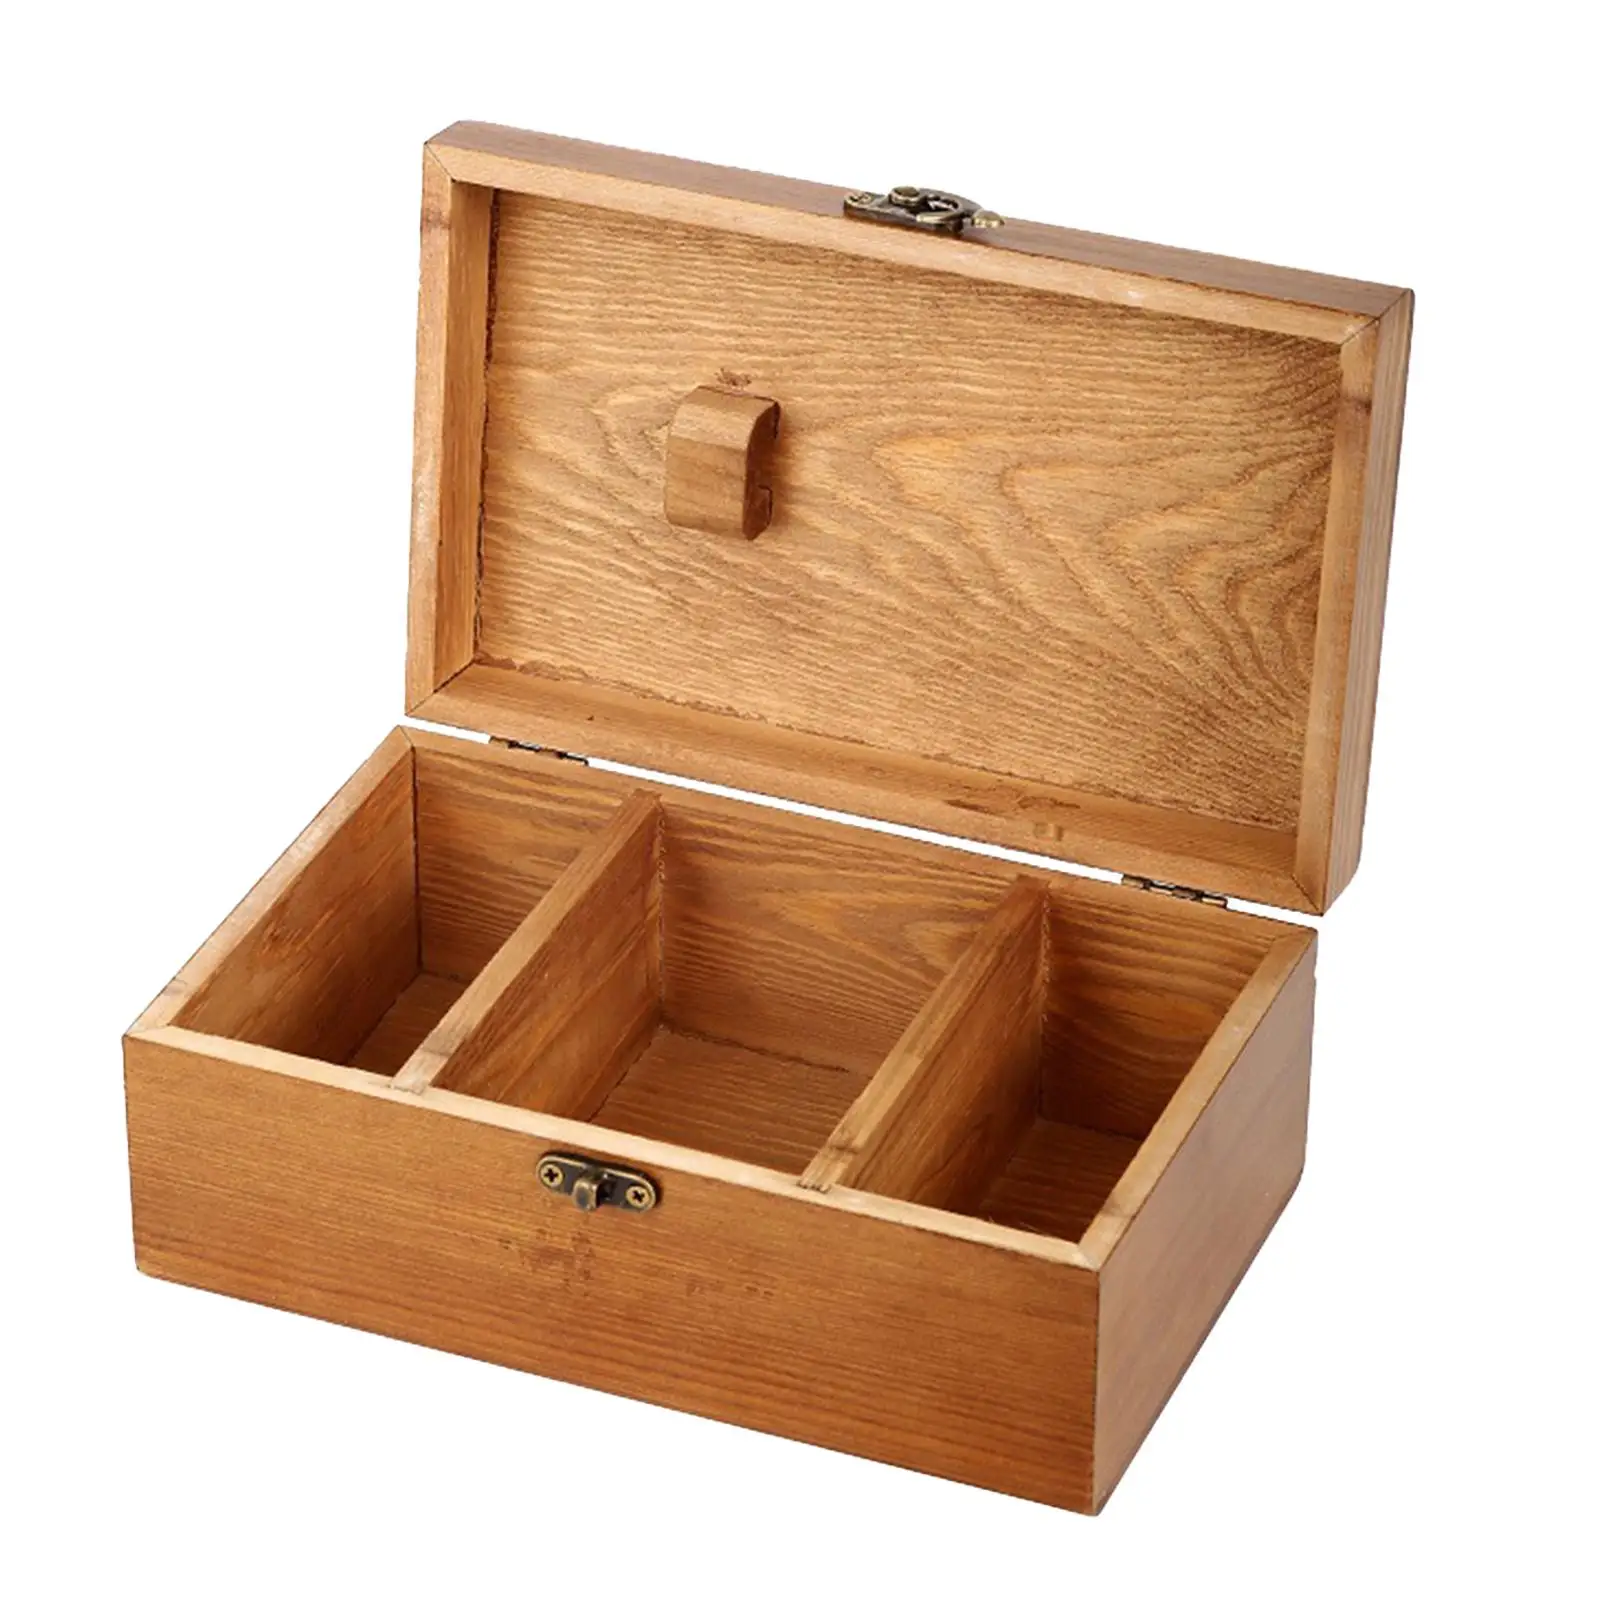 Wooden Sewing Box Empty Box for Jewelry Cosmetic Taraxacum Pattern Sewing Tools Needlework Wood Sewing Basket Sewing Box Basket